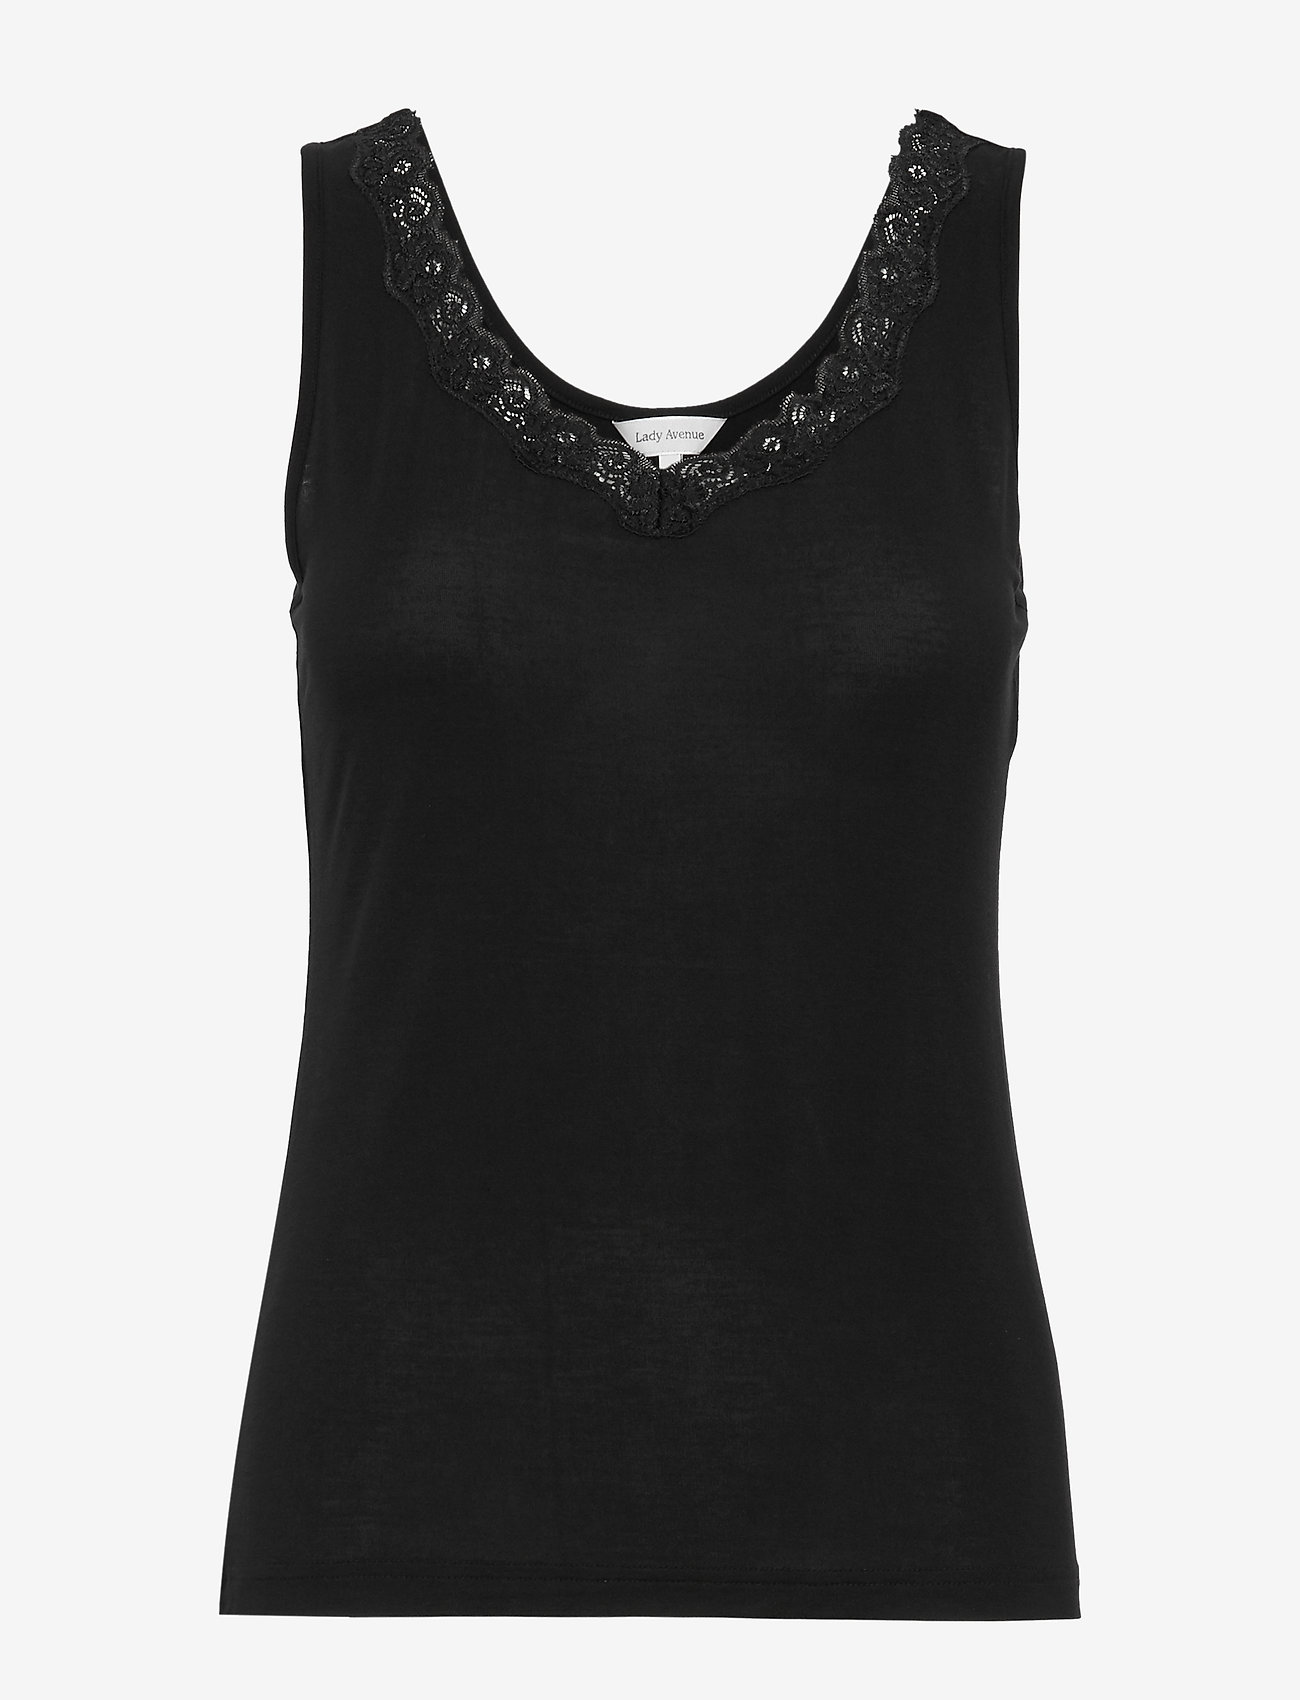 Lady Avenue - Bamboo - Tank top with lace - oberteile - black - 1